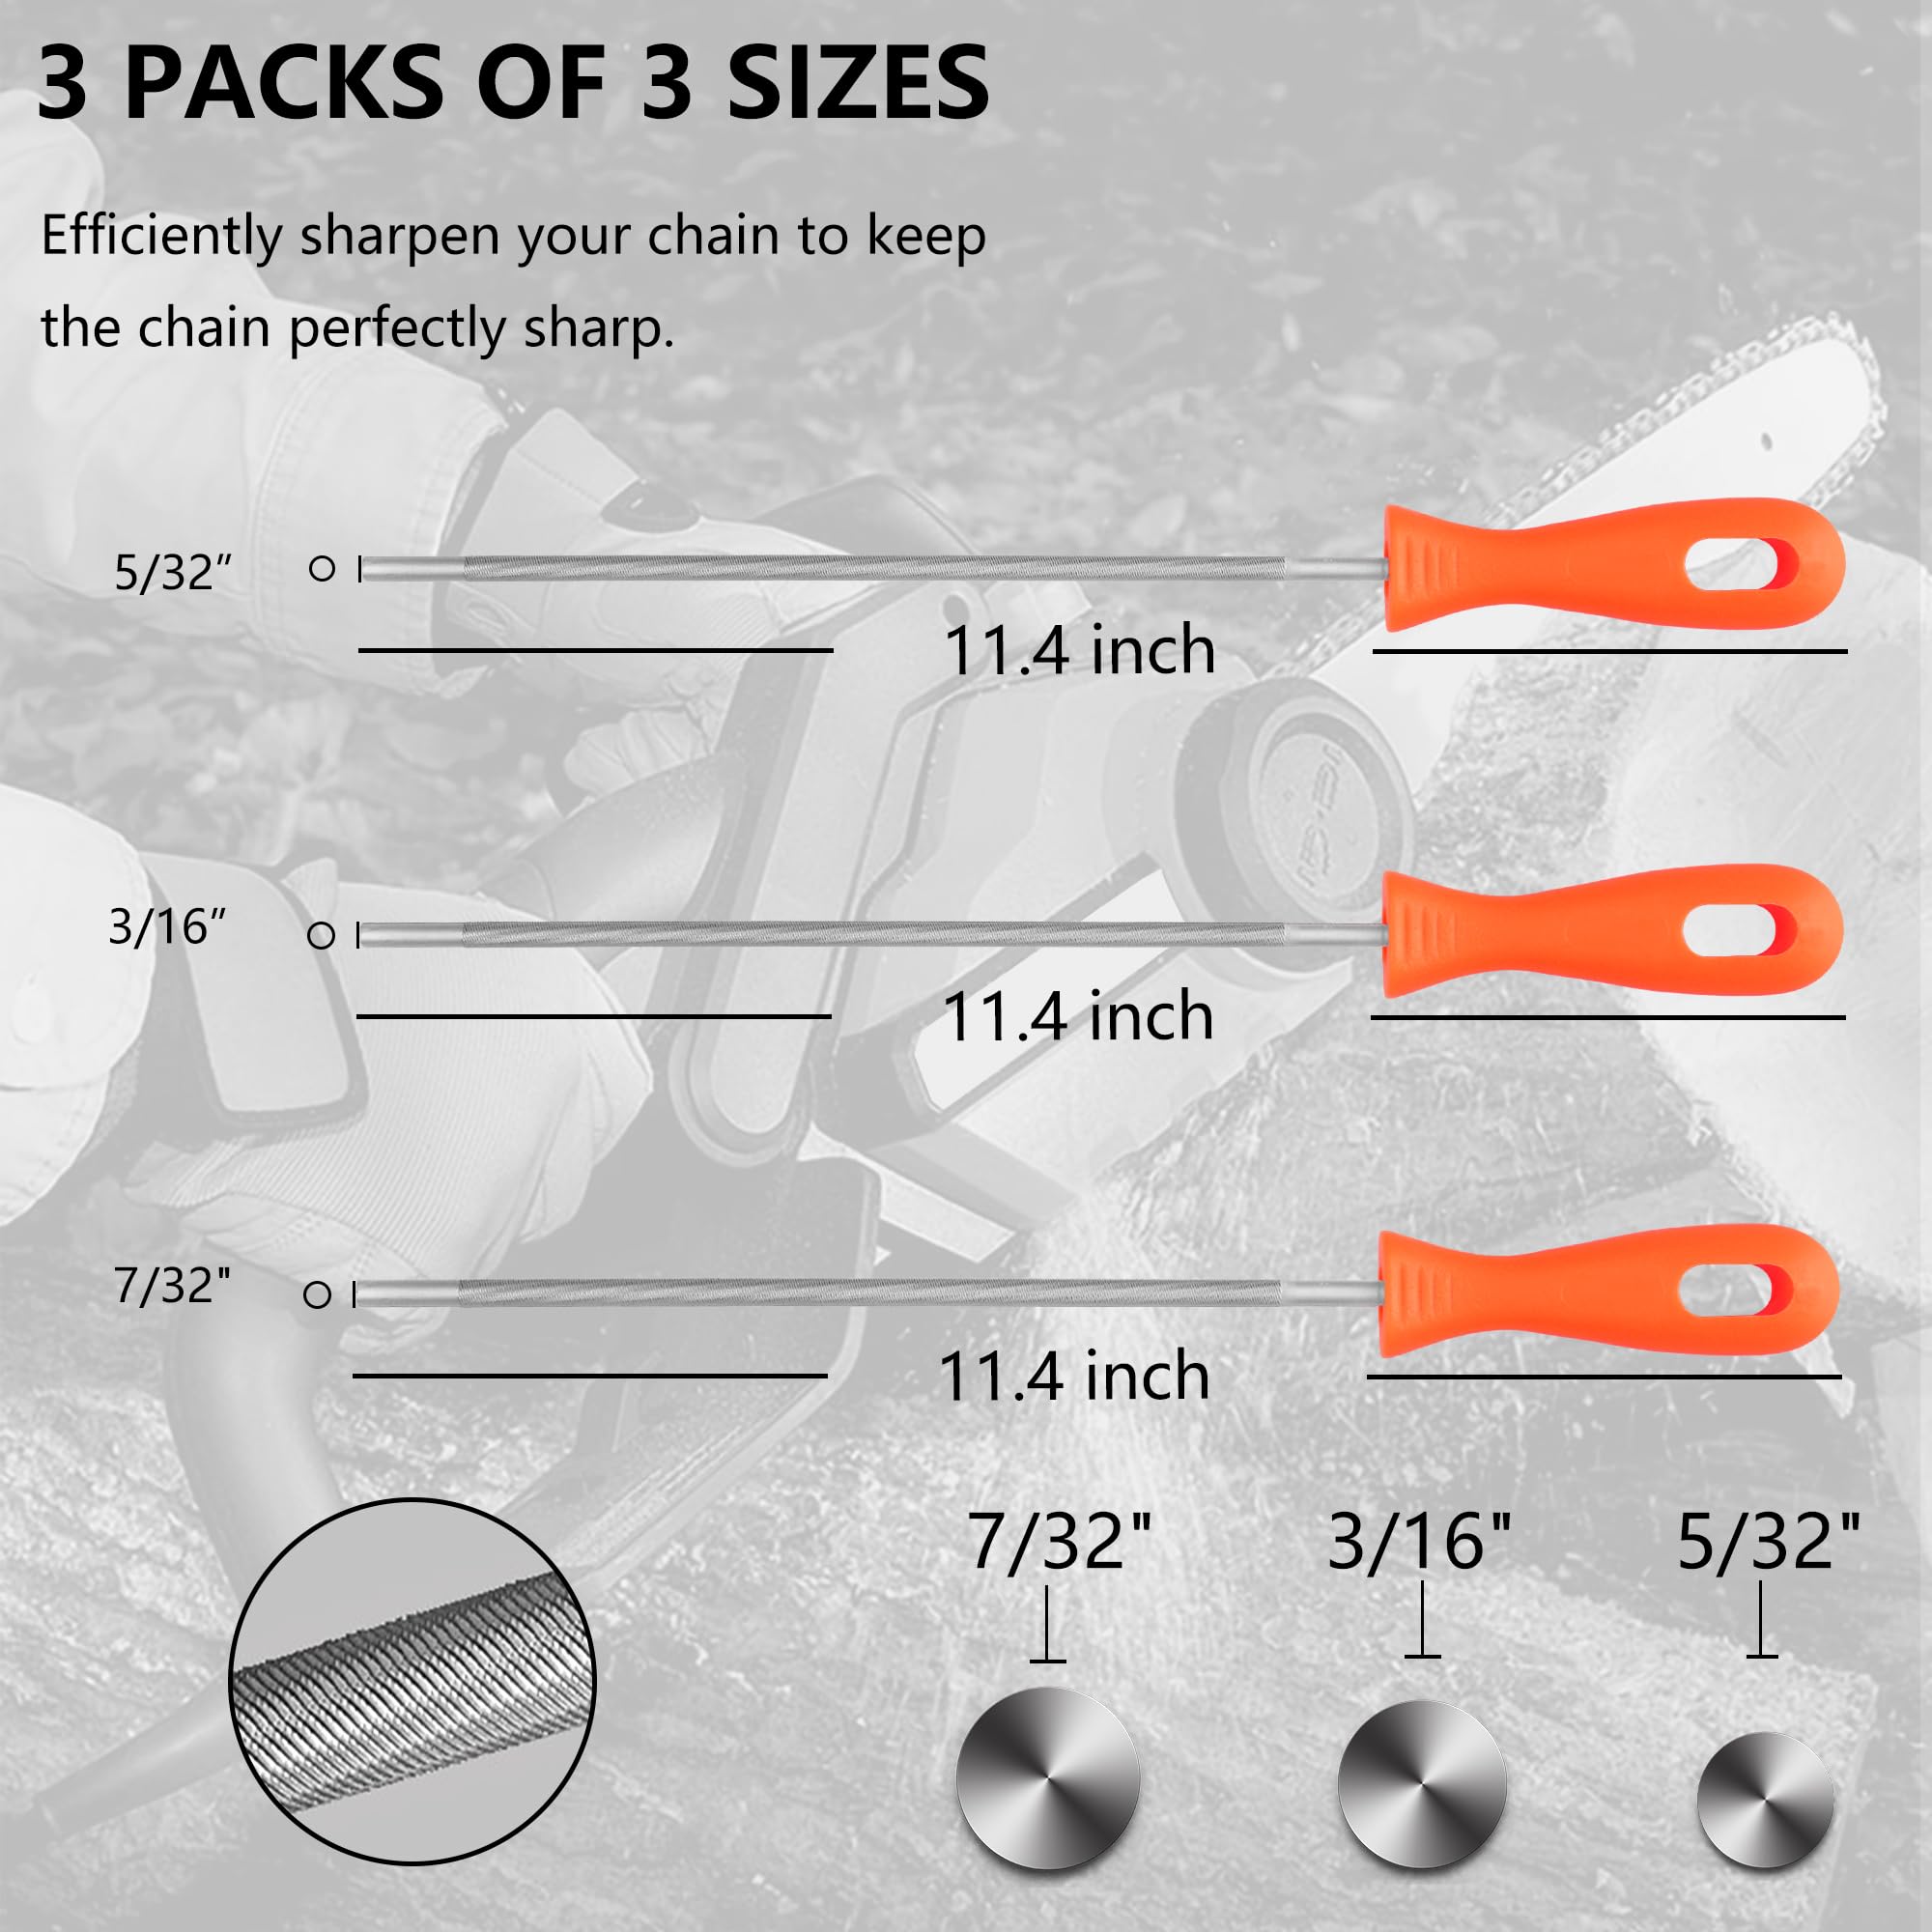 Restoo 3 Pack Chainsaw Sharpener File Kit for Sharpening Chainsaw Chain, Durable Steel Chain Saw Sharpener Tool Accessories with Hard Plastic Handle (3 Pack, 5/32, 7/32, 3/16 inch)